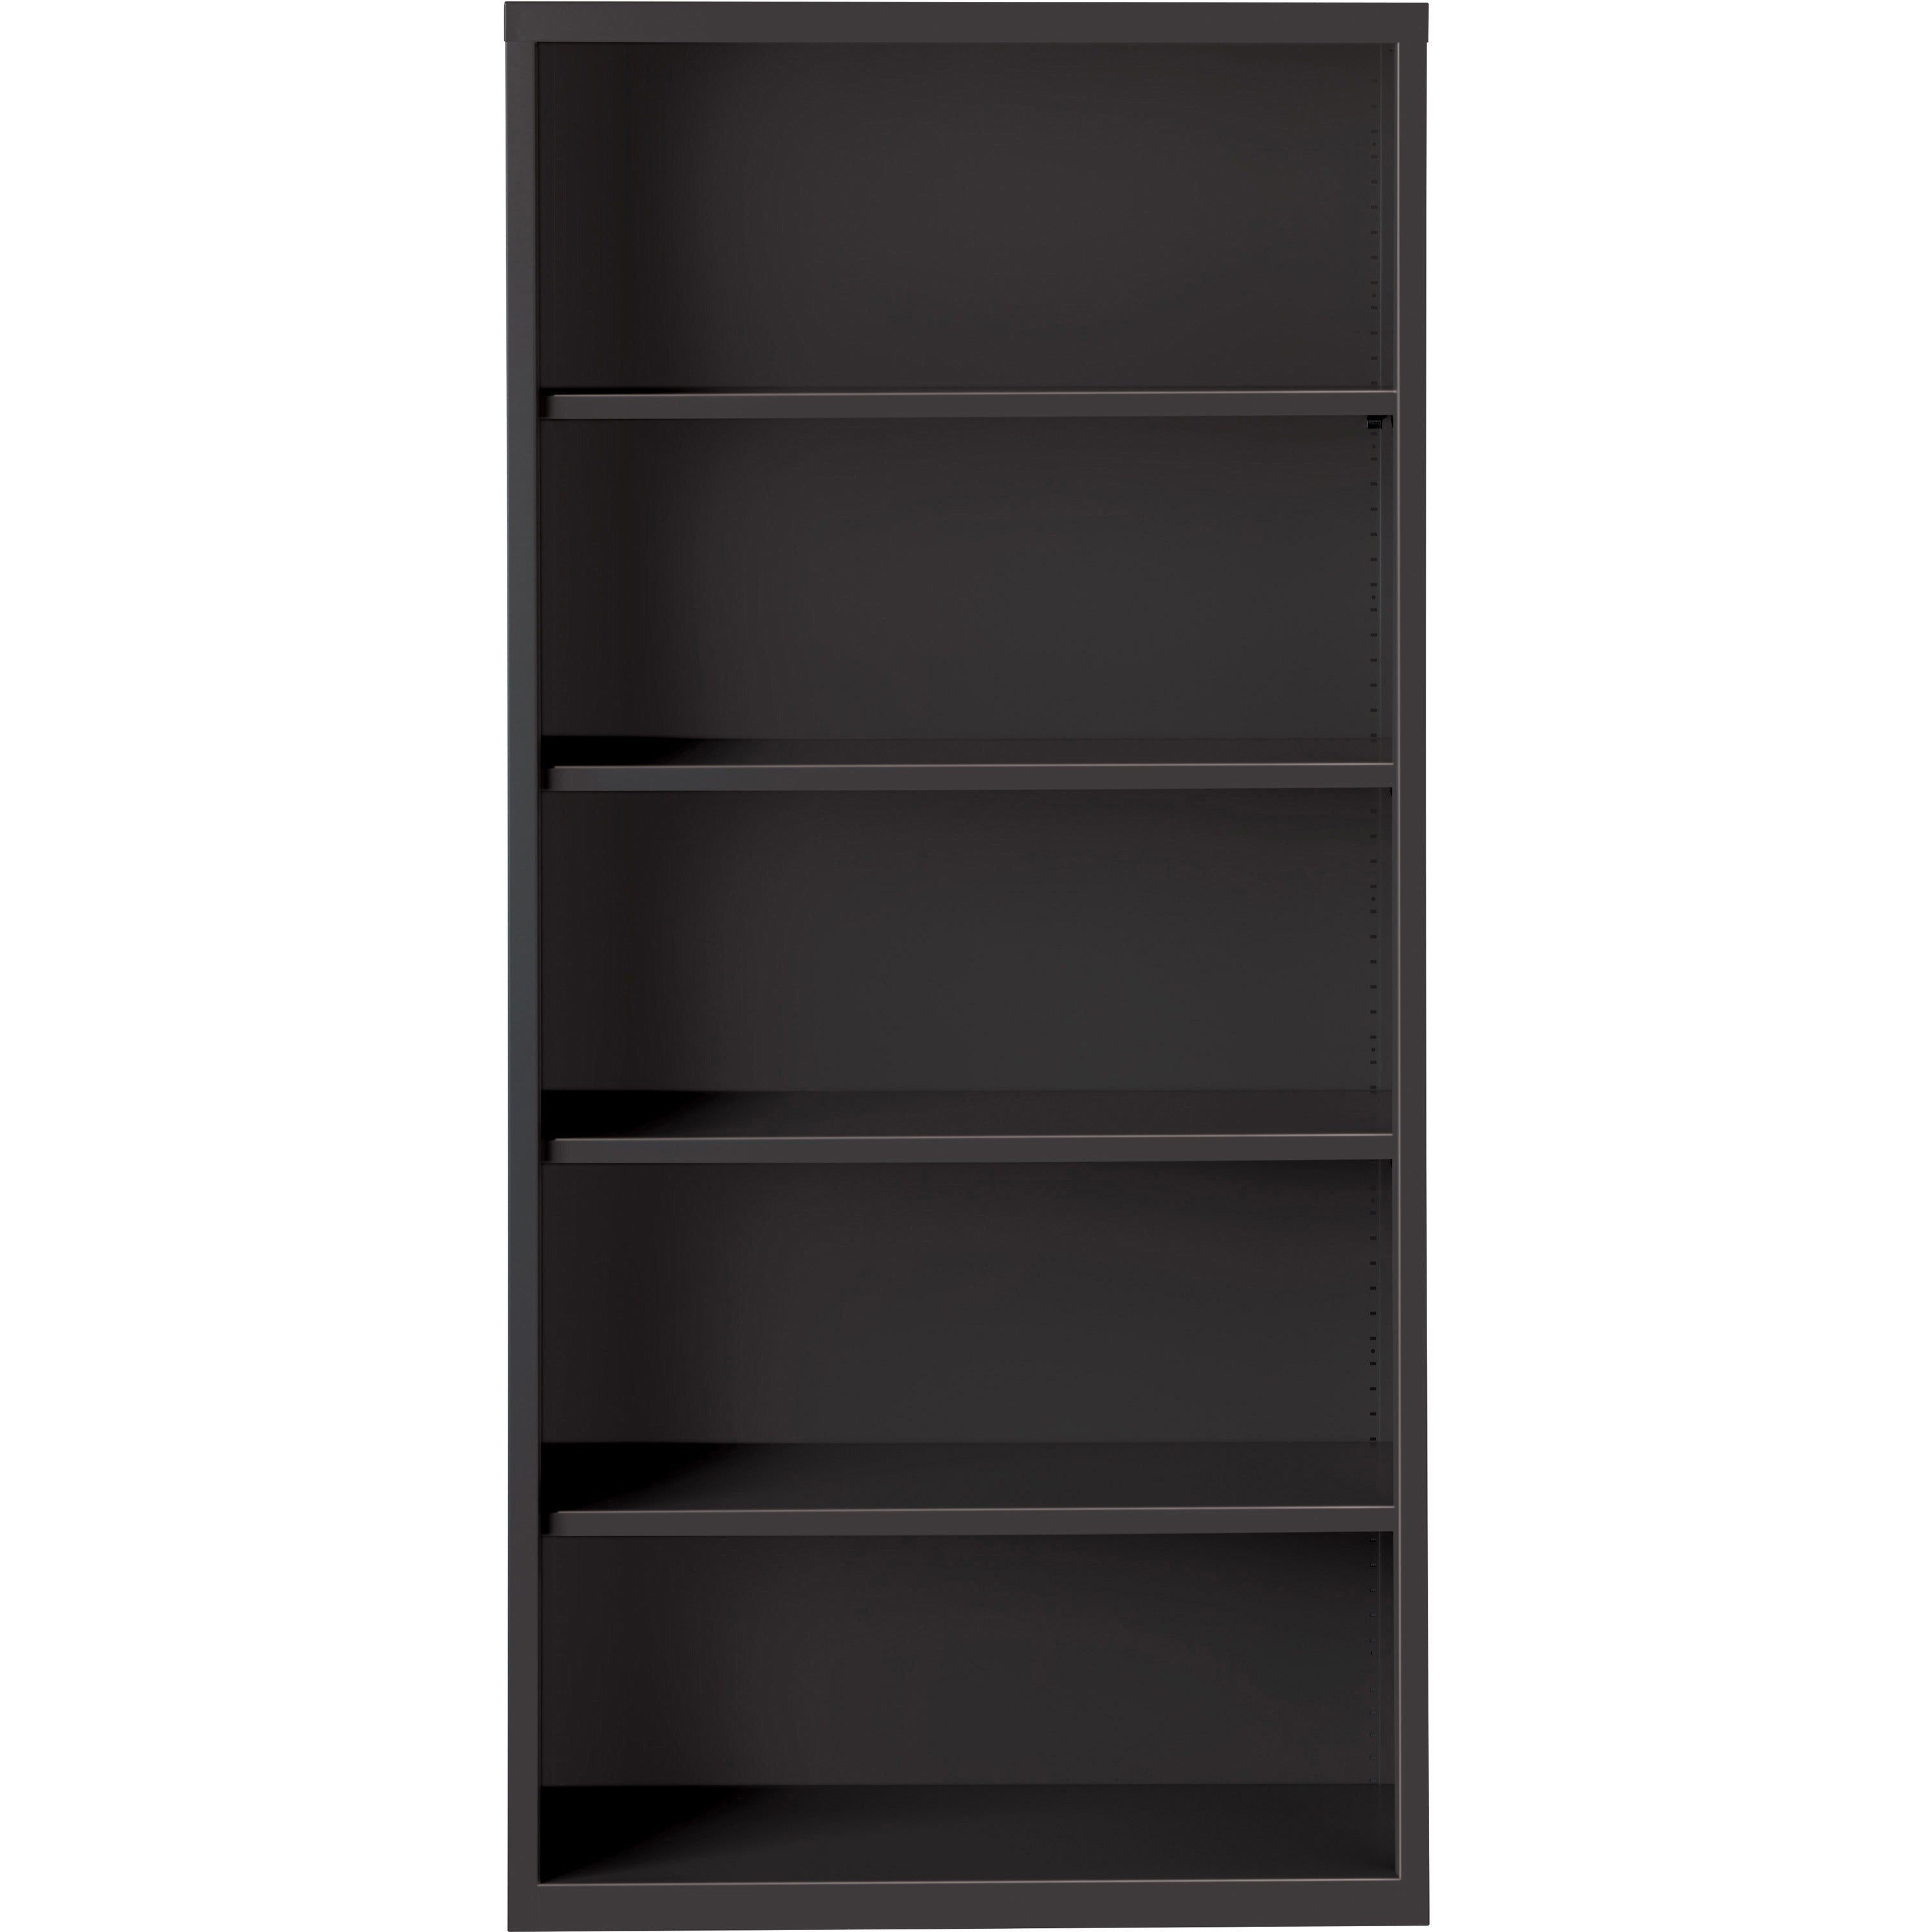 Lorell Fortress Series Bookcase - 34.5" x 13" x 72" - 5 x Shelf(ves) - Black - Powder Coated - Steel - Recycled - 